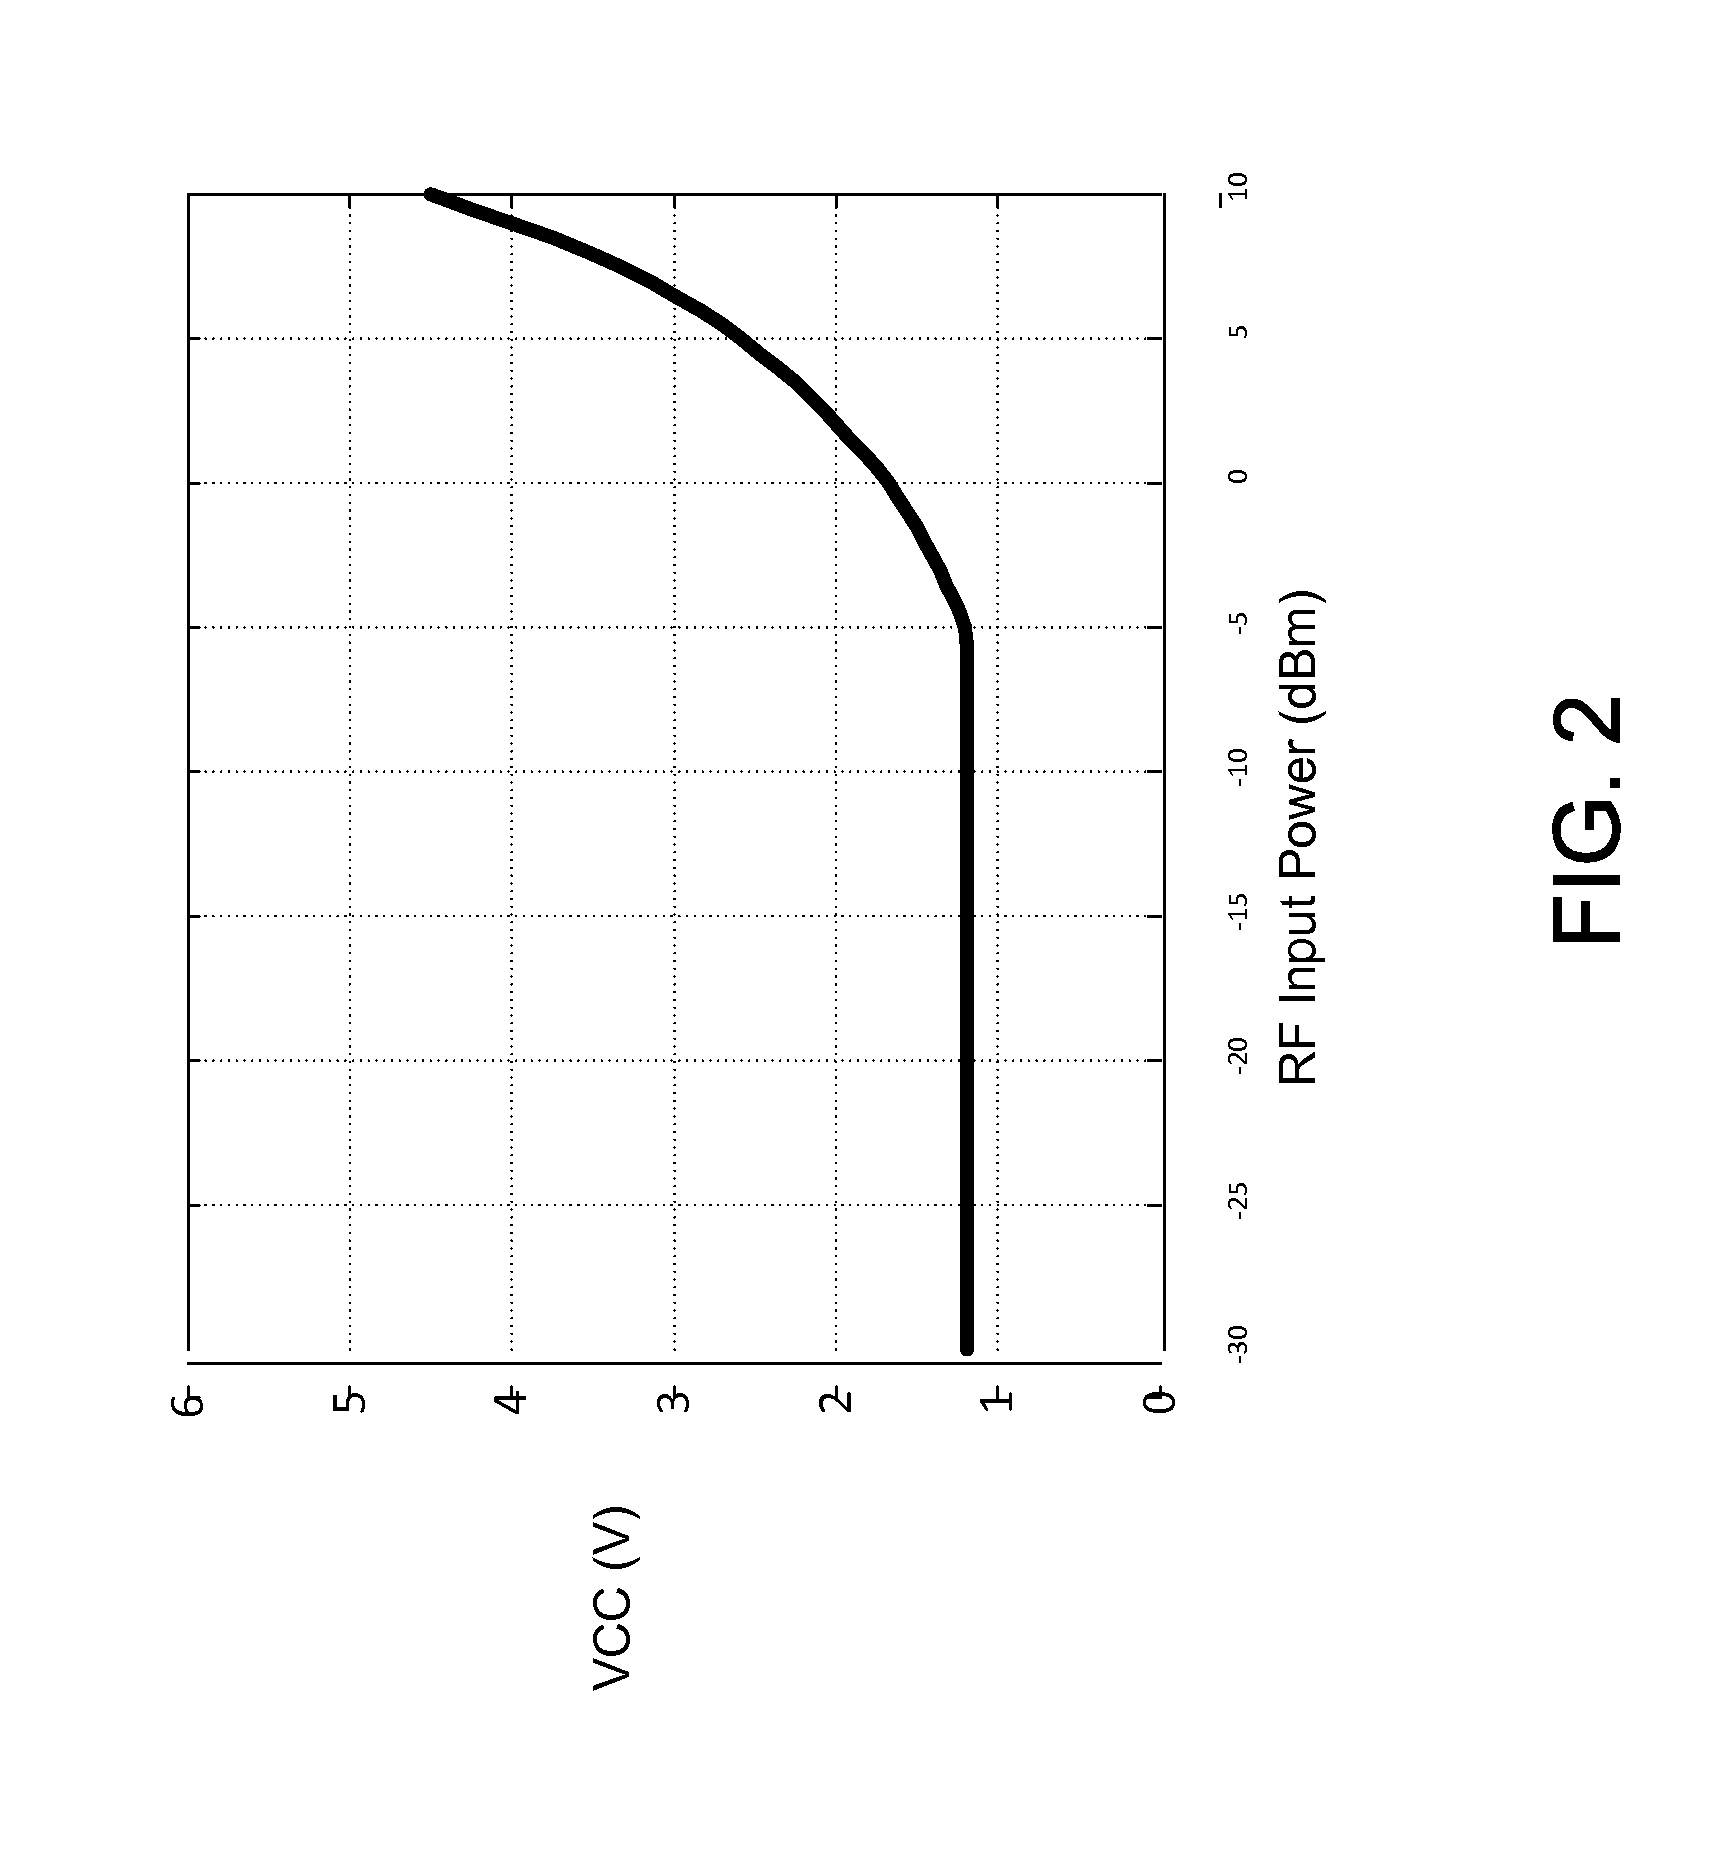 Envelope Tracking System with Internal Power Amplifier Characterization